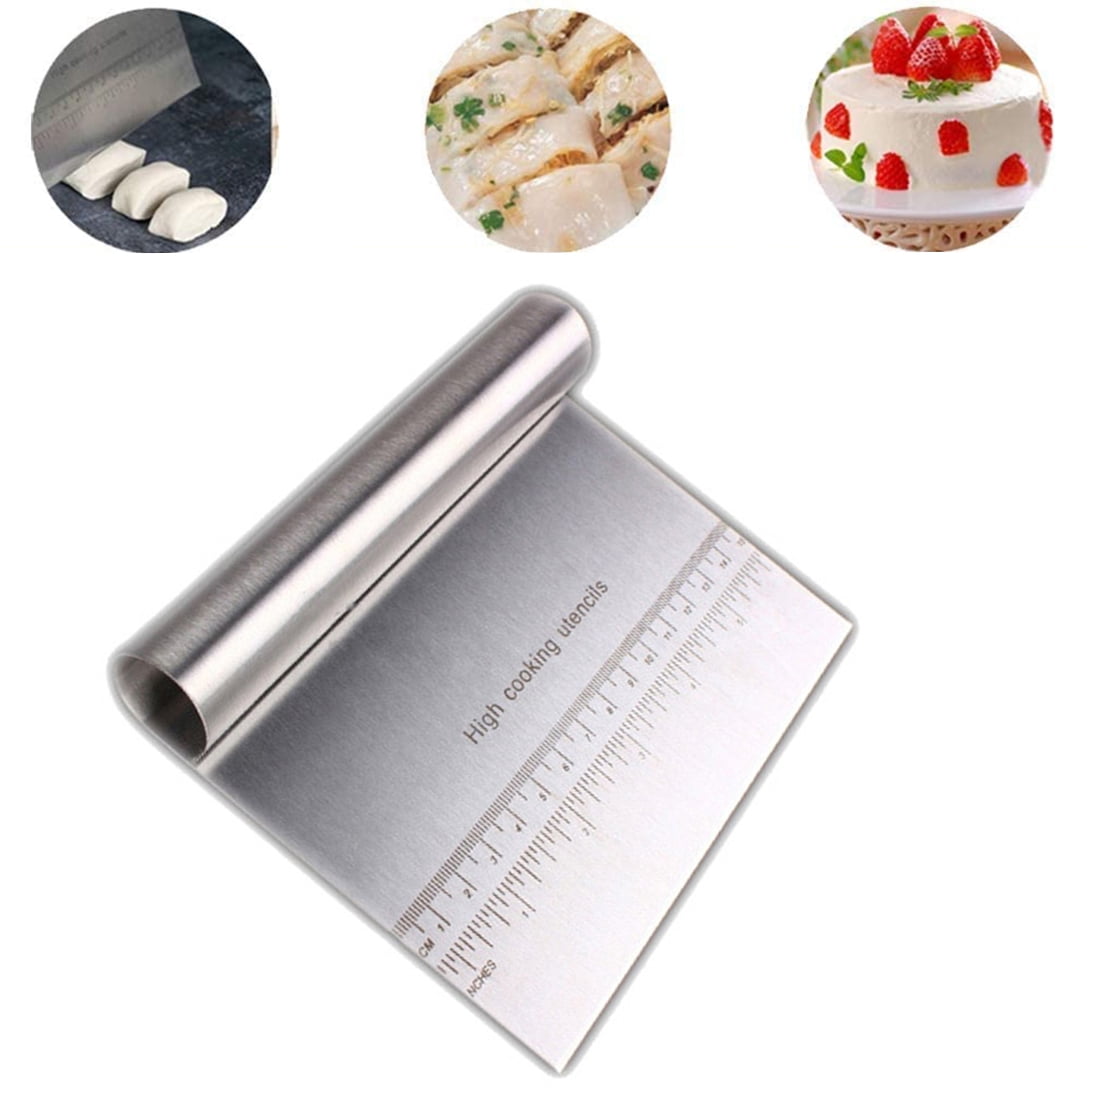 Stainless Steel Smoother Cake Pizza Flour Pastry Dough Scraper spatula MA